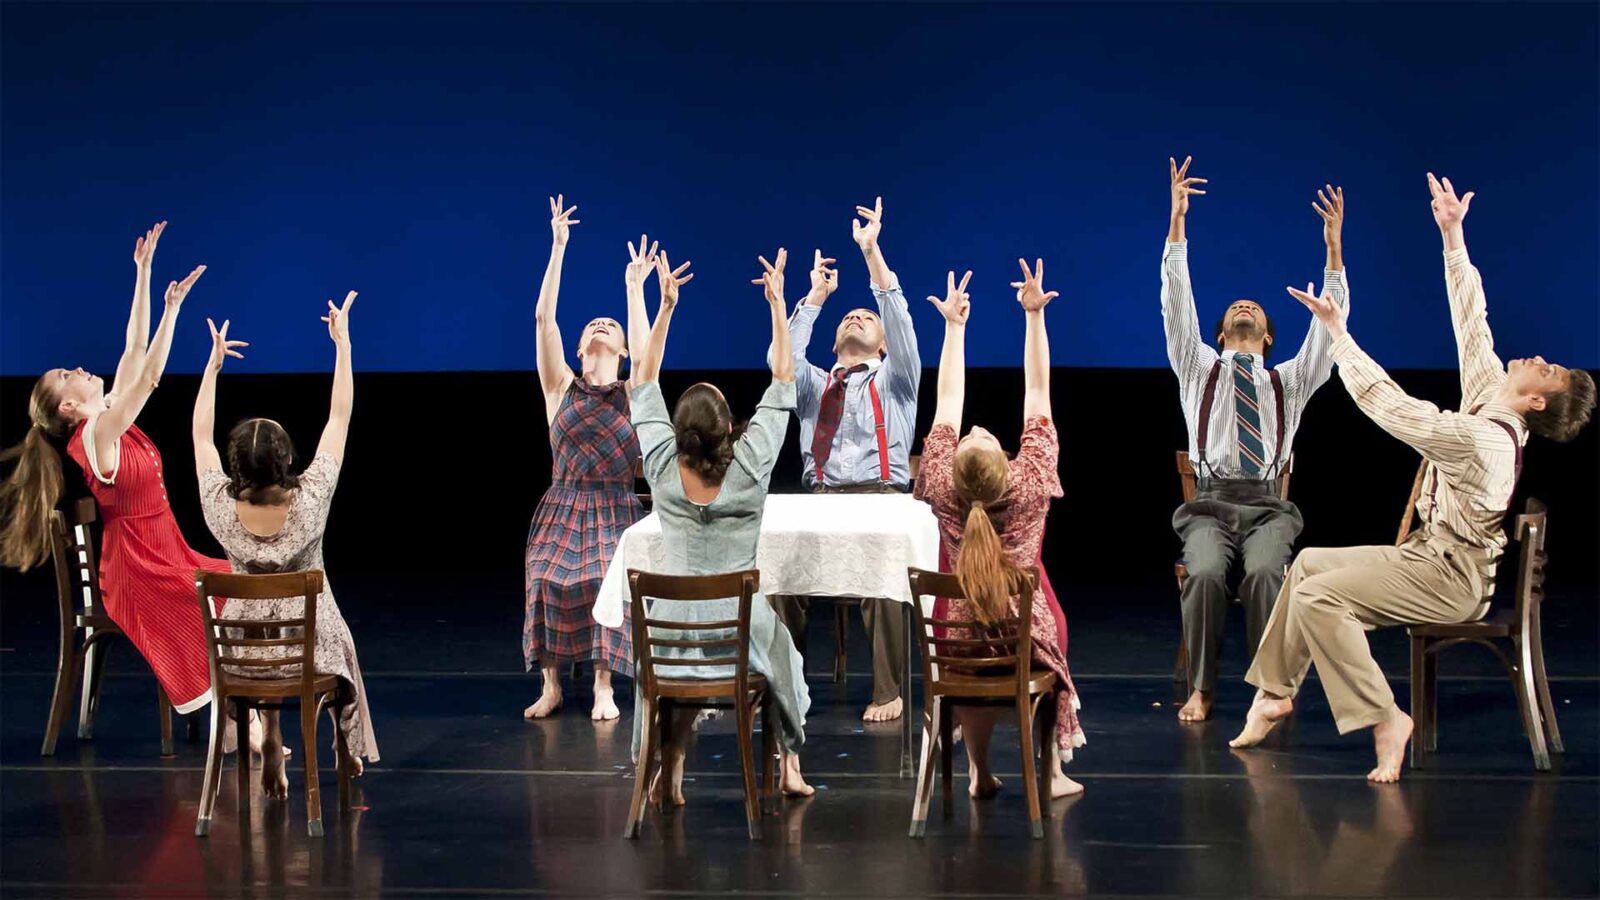 A group of dancers on stage dressed differently. They are sitting down with their arms towards the ceiling.